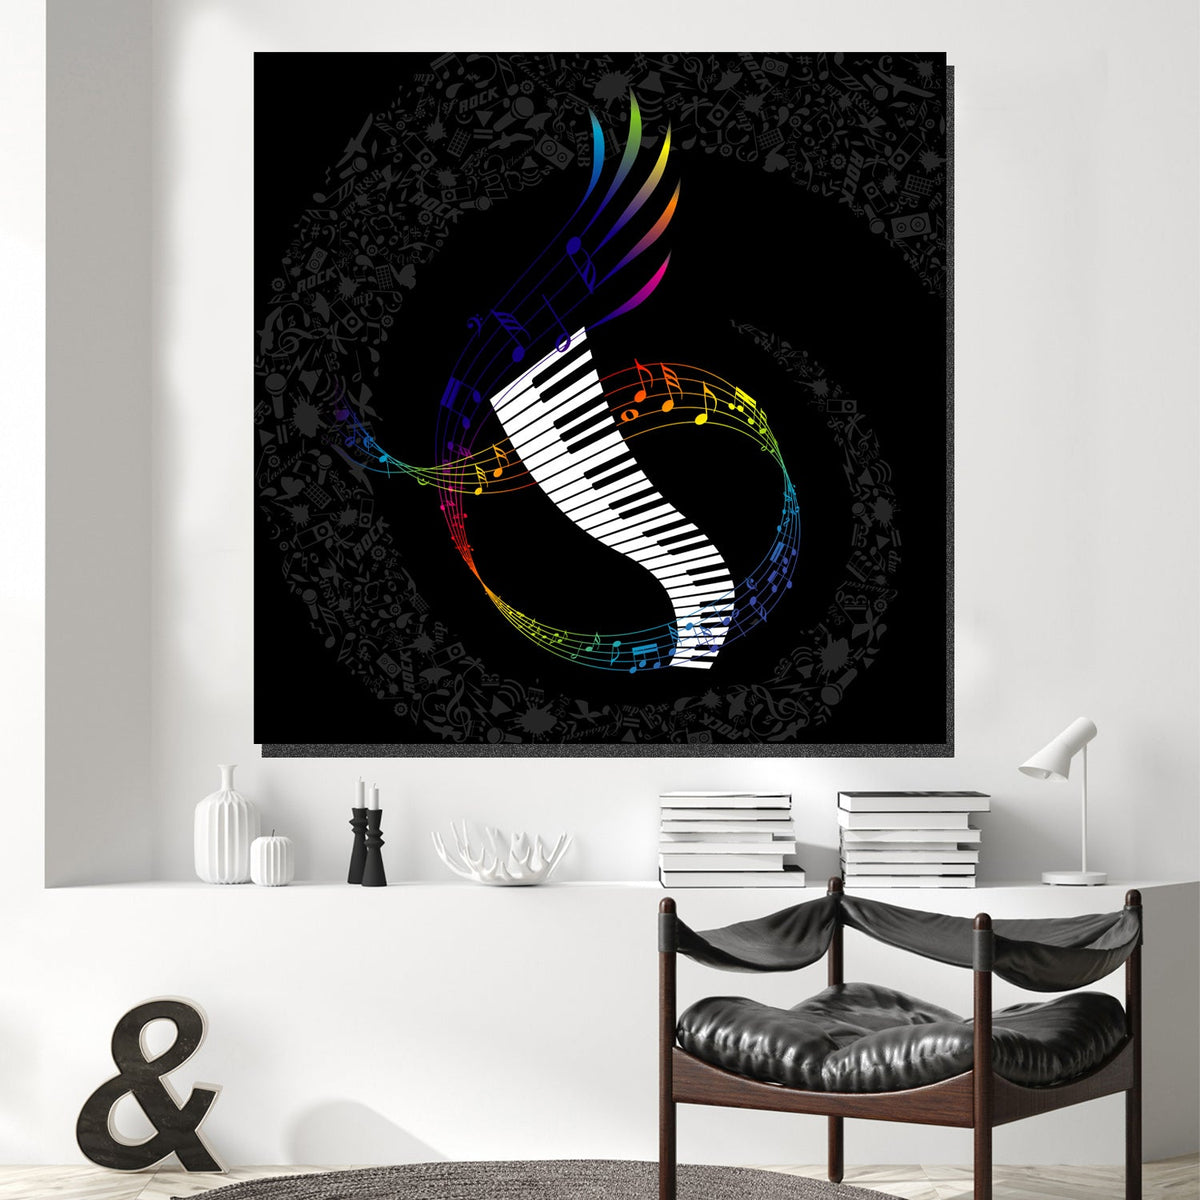 https://cdn.shopify.com/s/files/1/0387/9986/8044/products/ColourfulMusicalCollageCanvasArtprintStretched-2.jpg